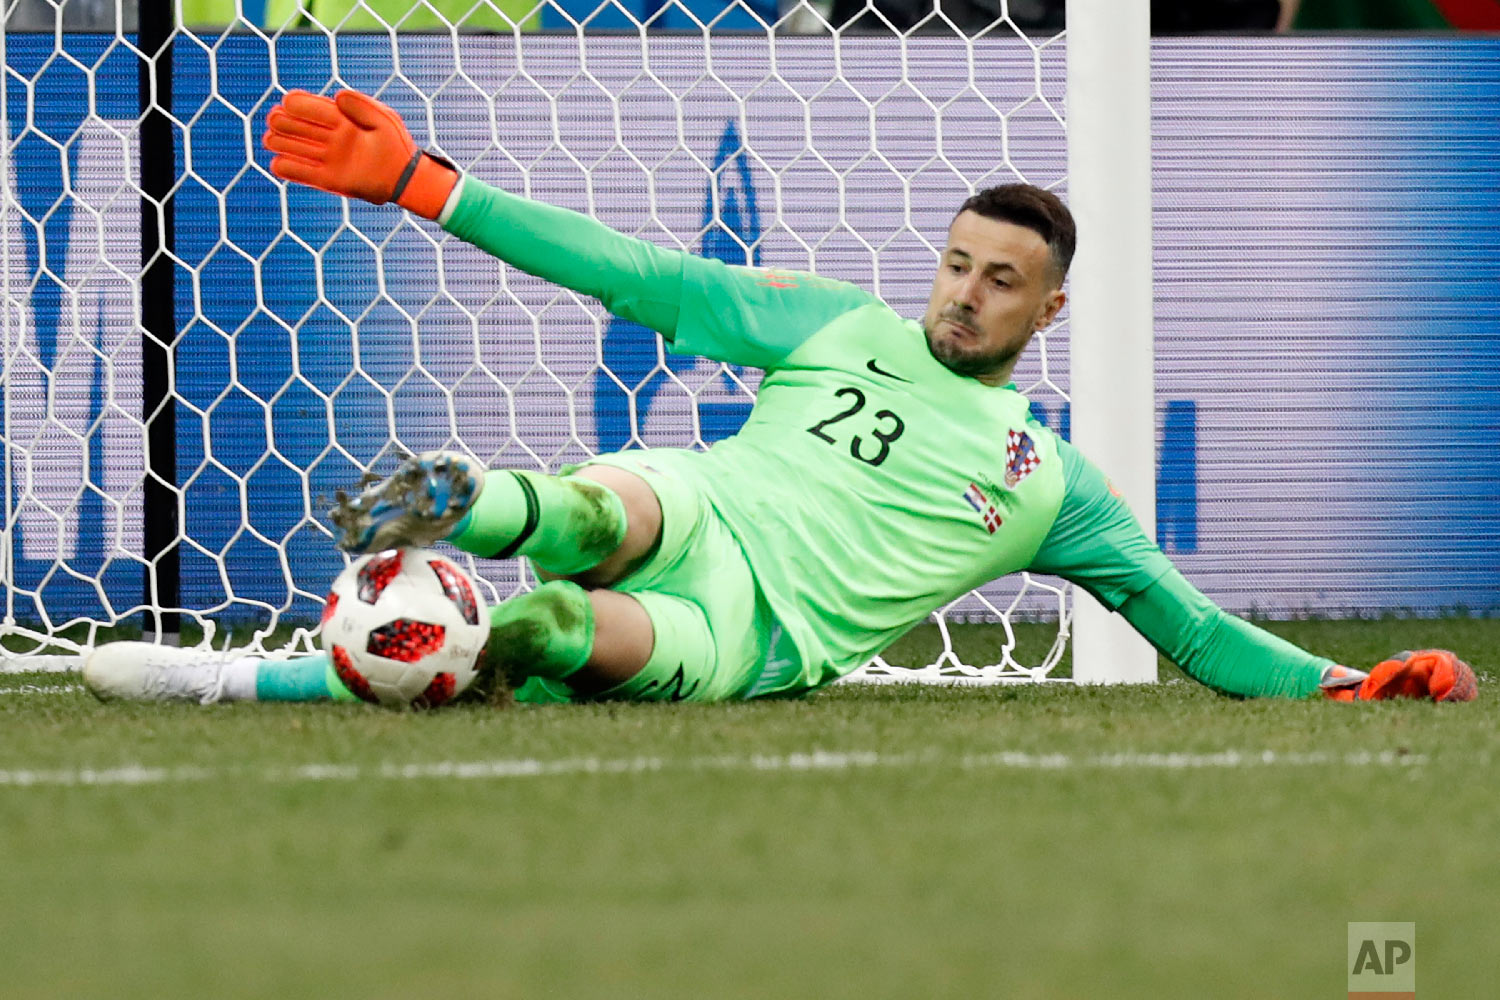  Croatia goalkeeper Danijel Subasic saves the decisive penalty during a penalty shoot out after extra time during the round of 16 match between Croatia and Denmark at the 2018 soccer World Cup in the Nizhny Novgorod Stadium, in Nizhny Novgorod , Russ